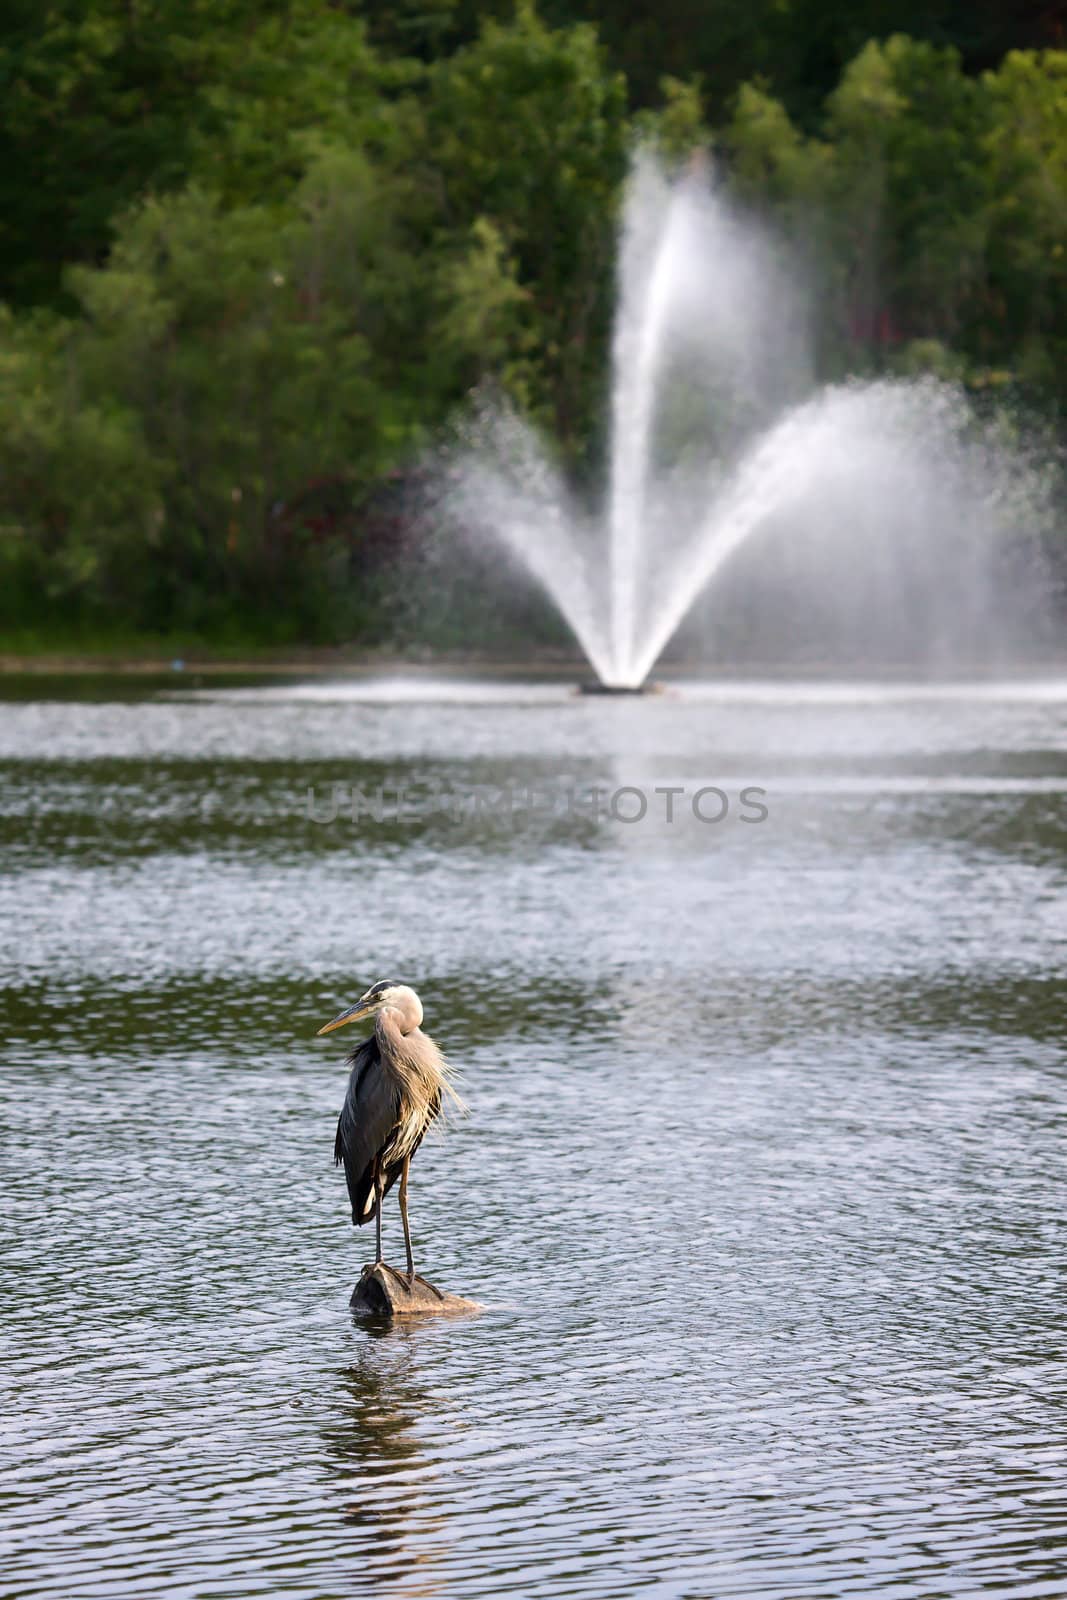 Great Blue Heron standing on a log in the water.